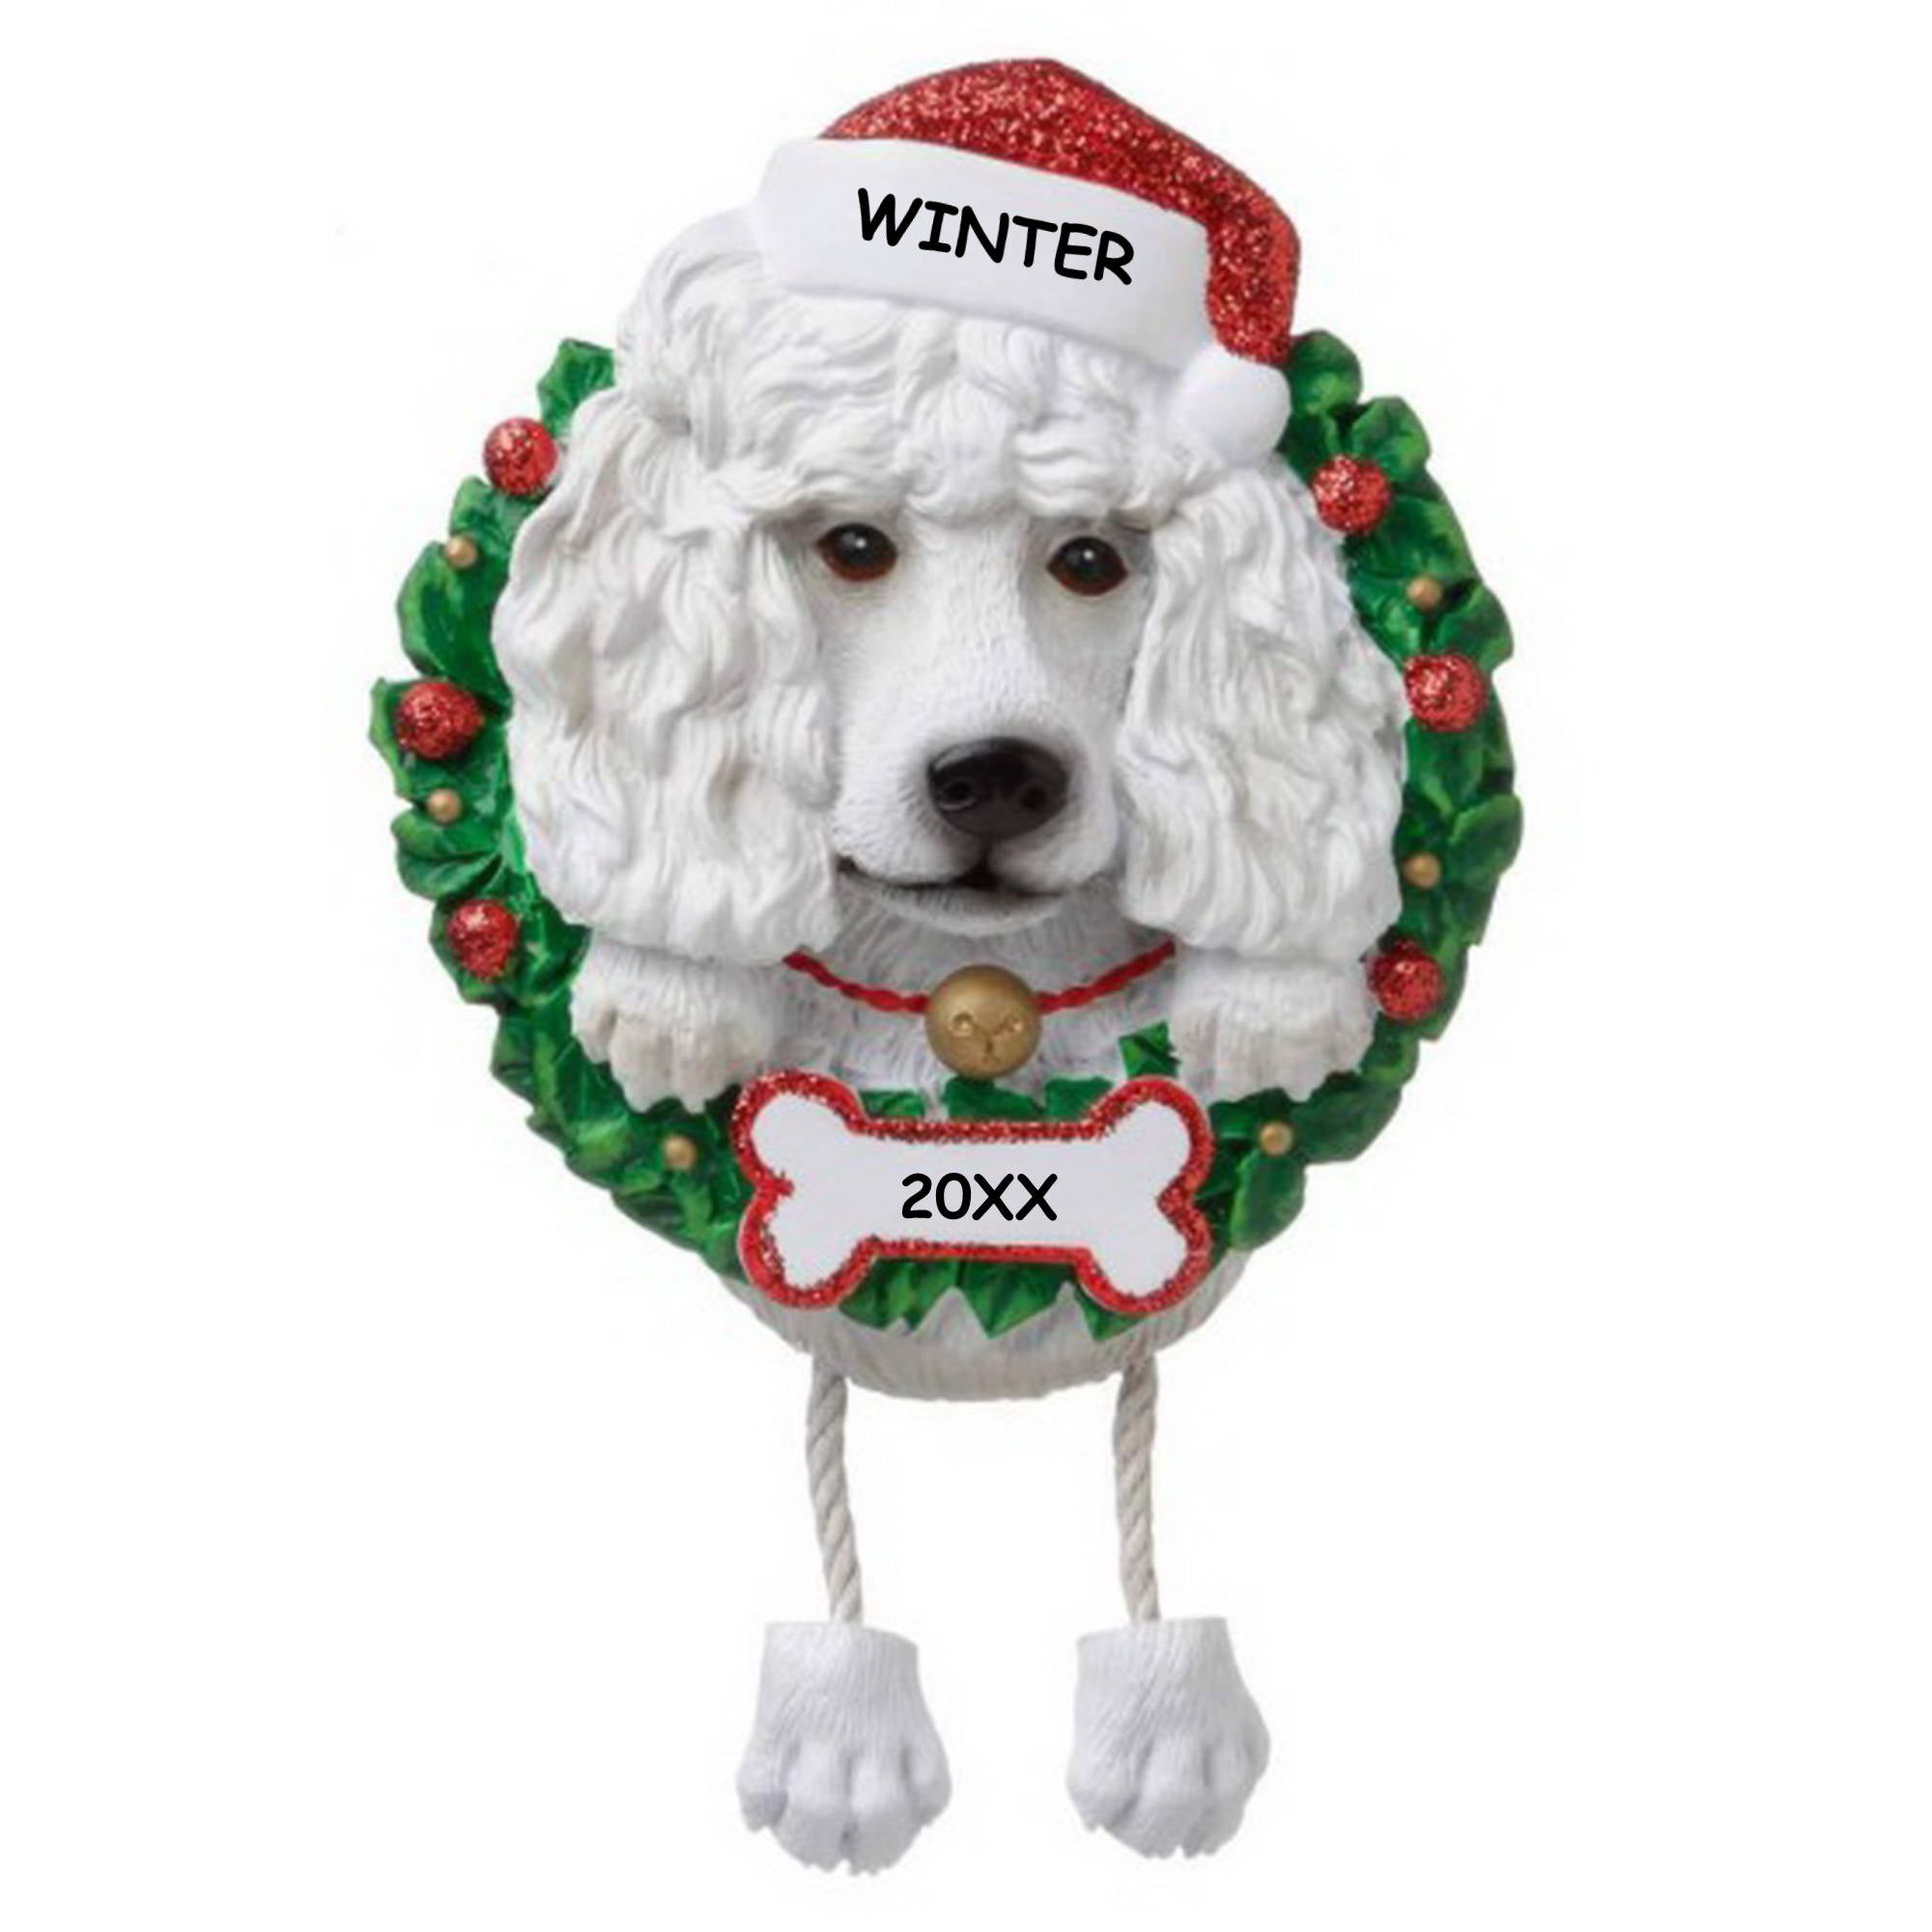 Personalized Pet Dog Christmas Ornament - White Poodle